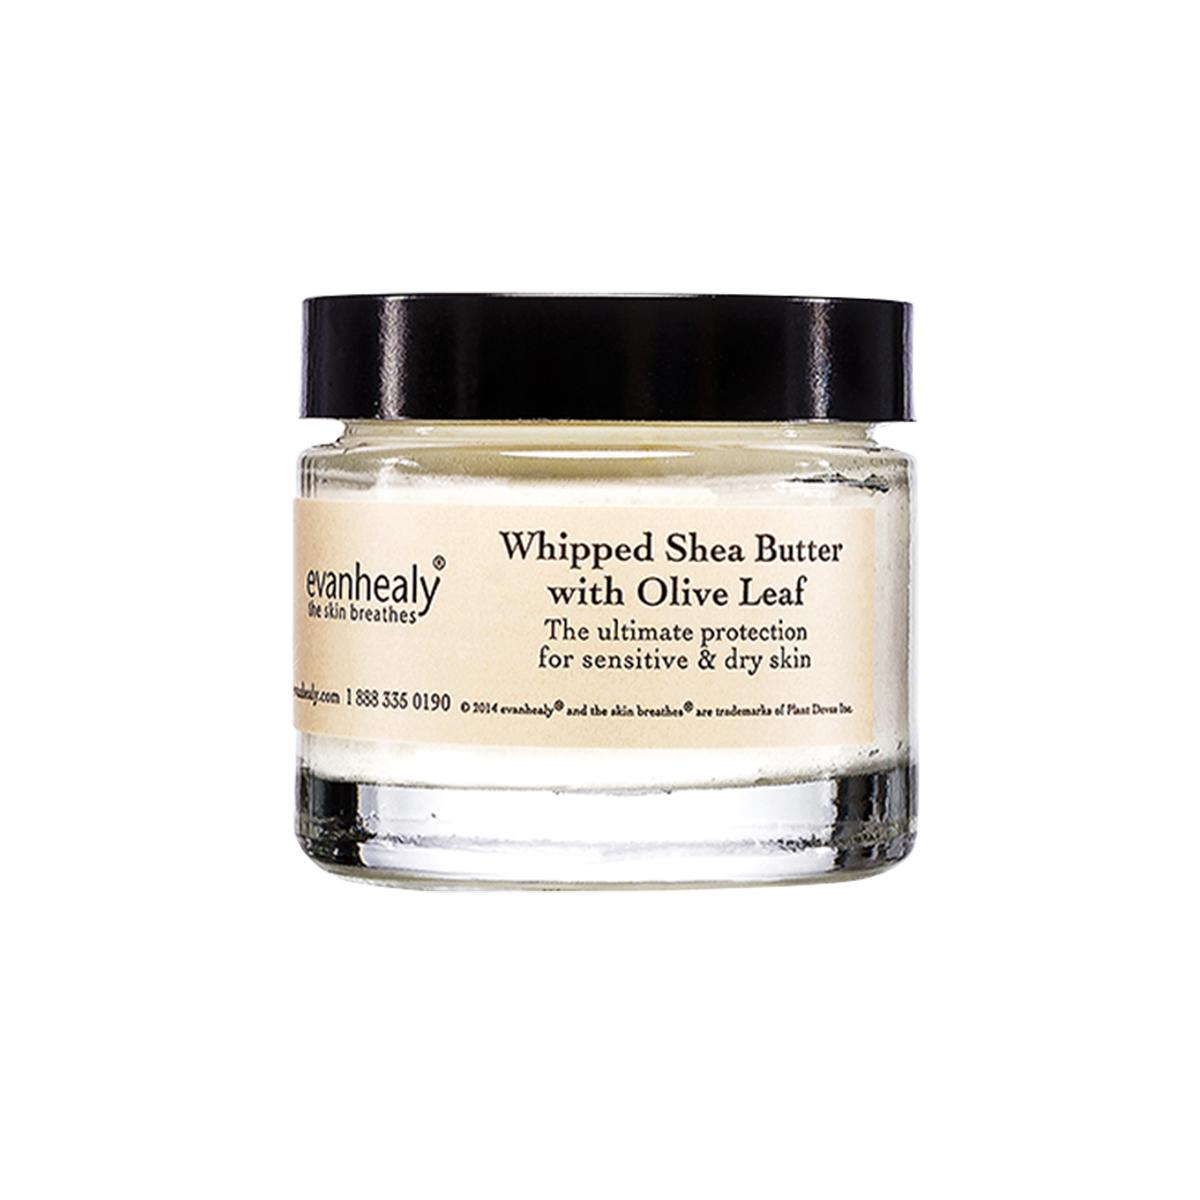 Primary image of Whipped Shea Butter with Olive Leaf